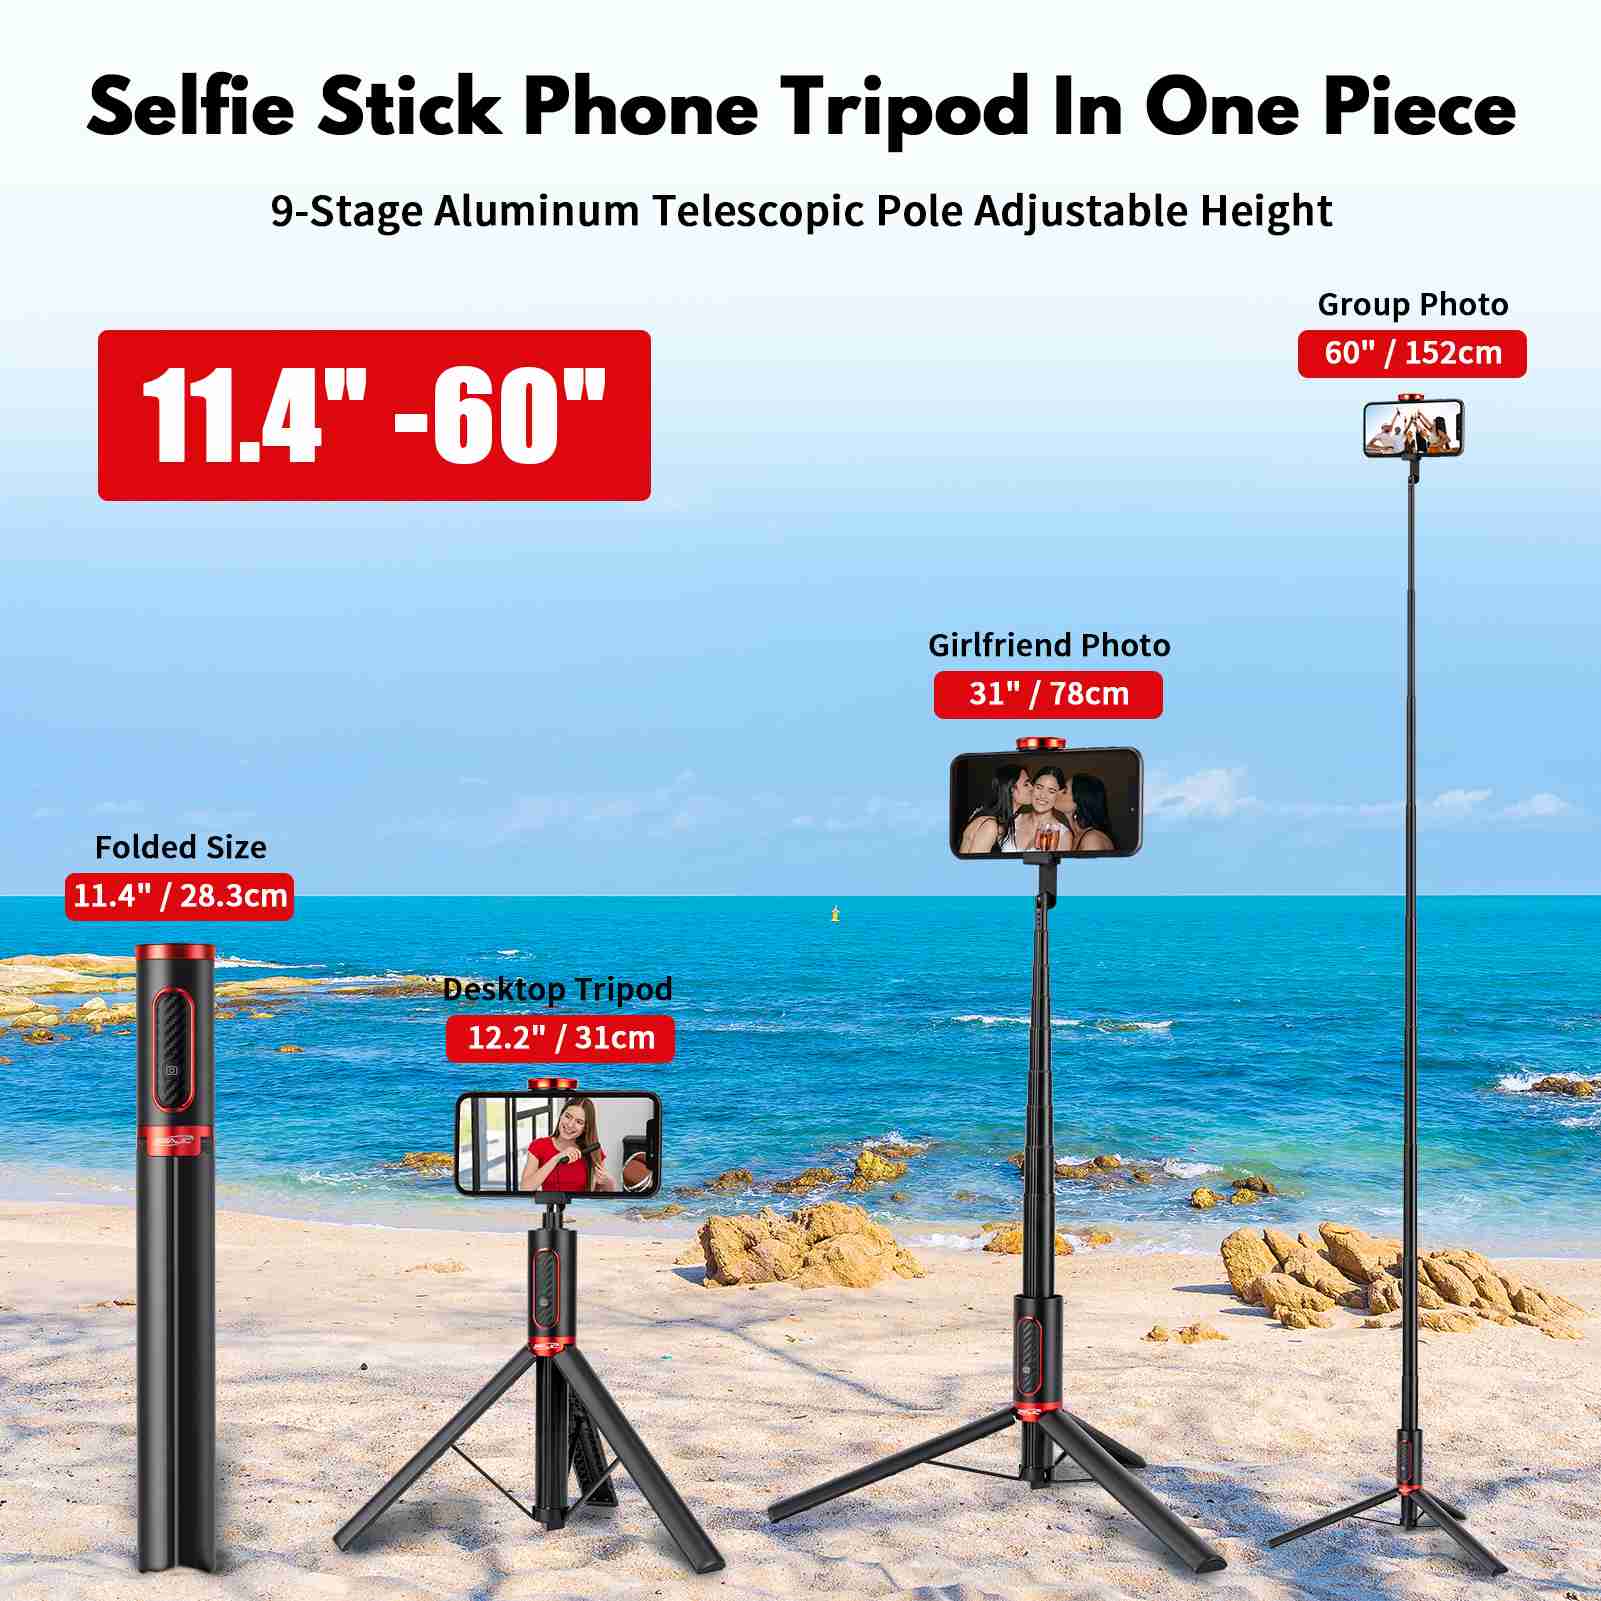 selfie-stick-phone-tripod-tripod-for-iphone for cheap